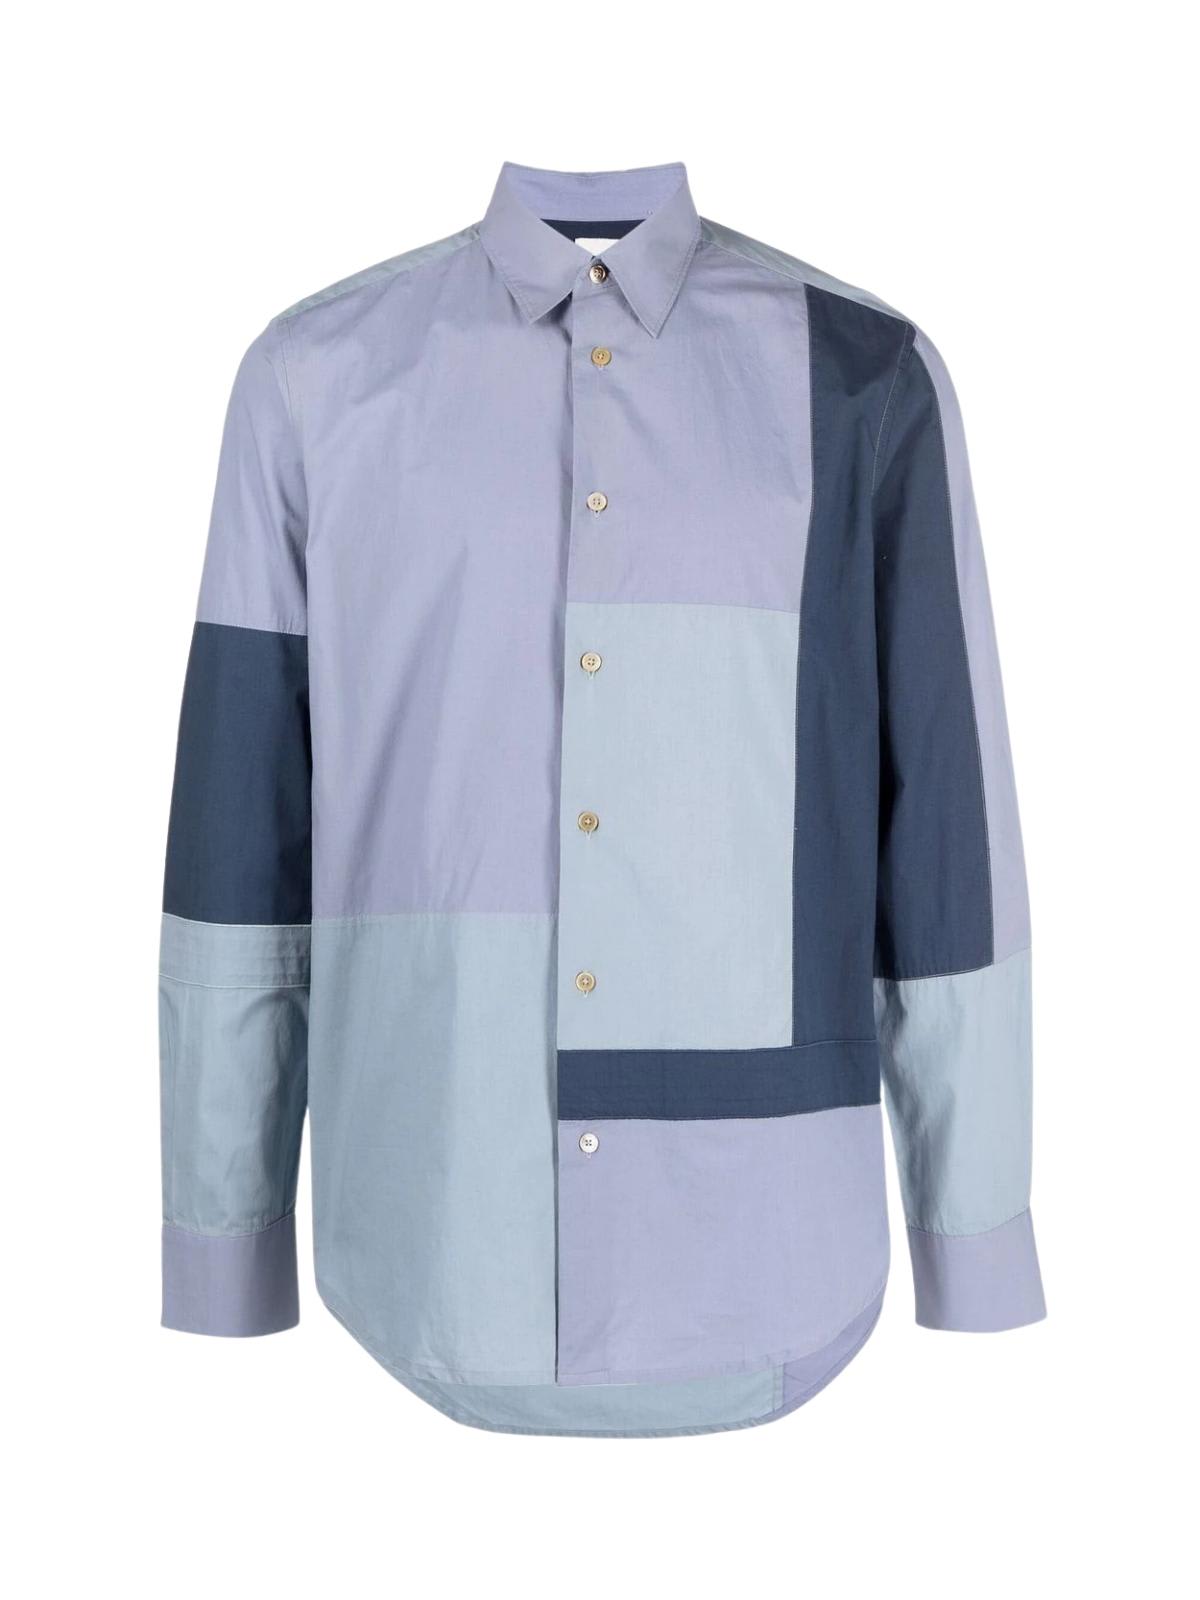 Paul Smith Gents Tailored Patchwork Shirt